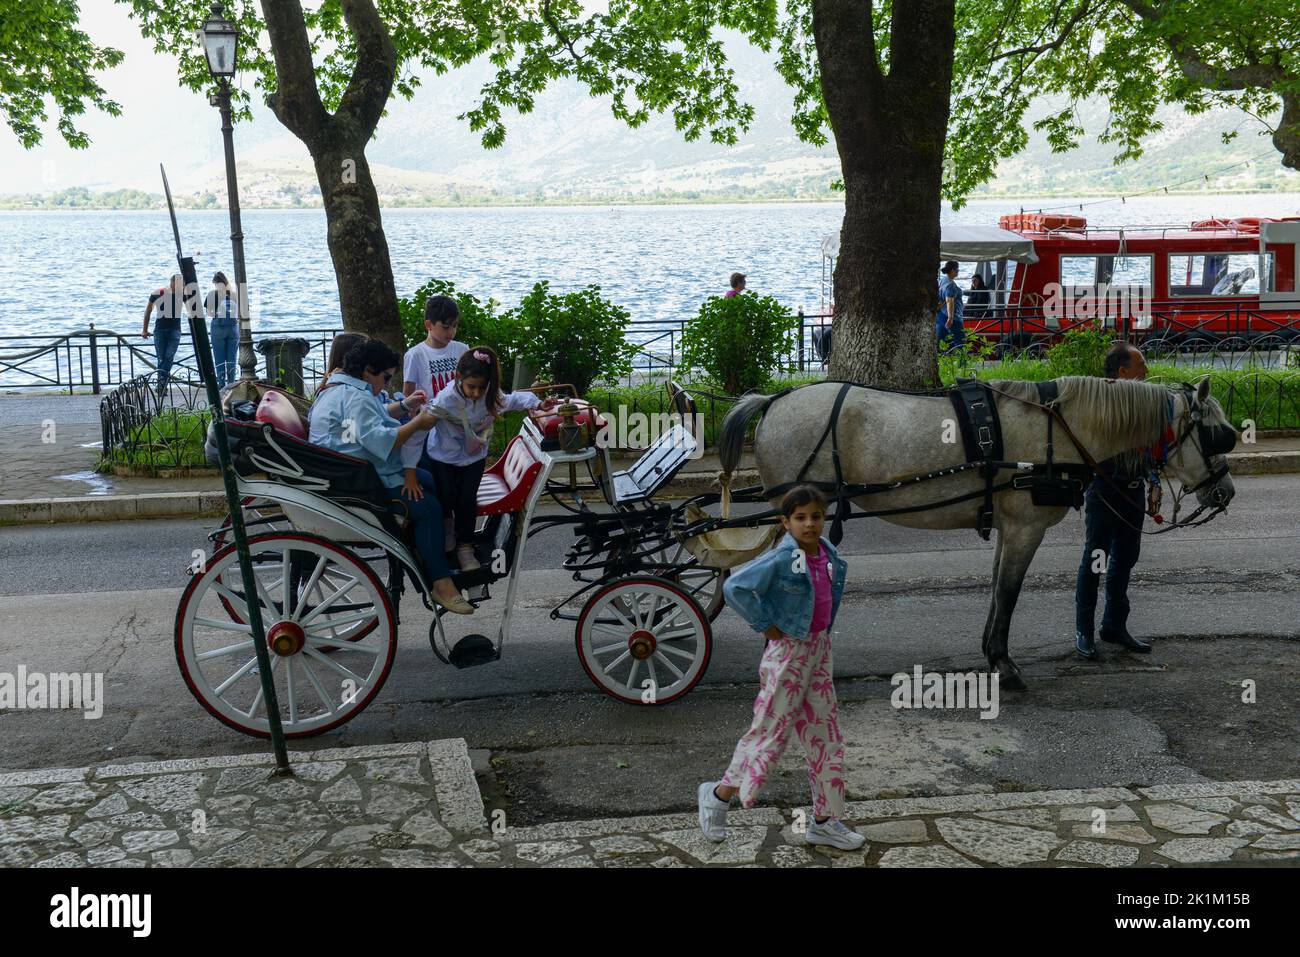 Ioannina, Greece - 16 May 2022: people traveling in a horse-drawn carriage at Ioannina on Greece Stock Photo